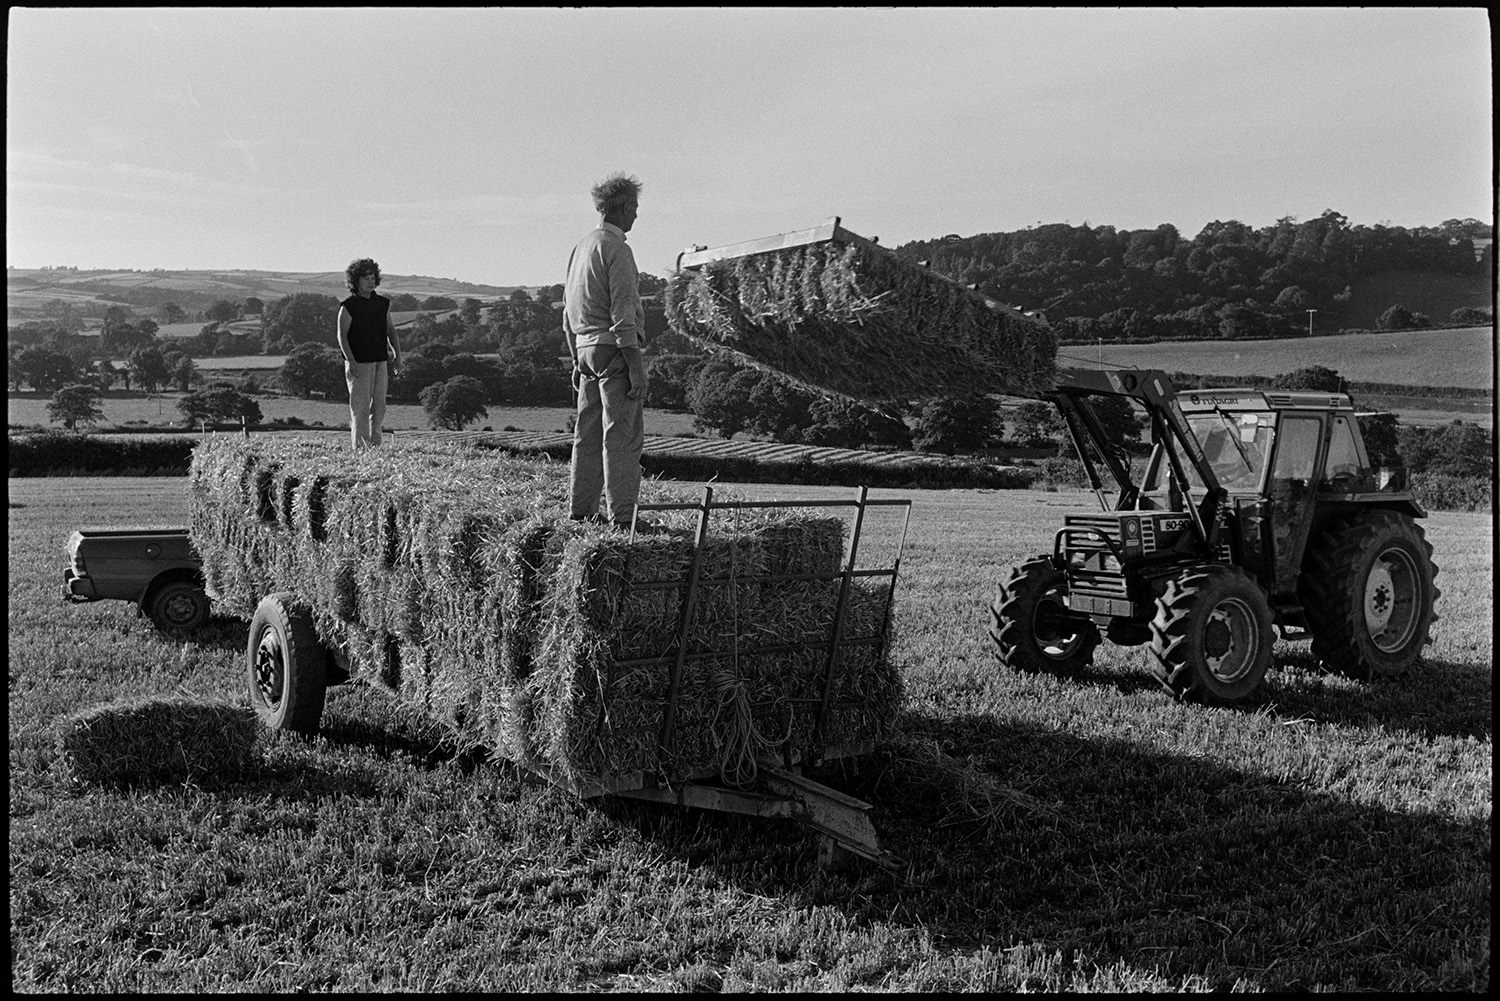 Loading bales of straw.
[A man and woman standing on bales of straw on a trailer while bales are loaded onto the trailer by a tractor, in a field at Rashleigh Barton, Chulmleigh.]